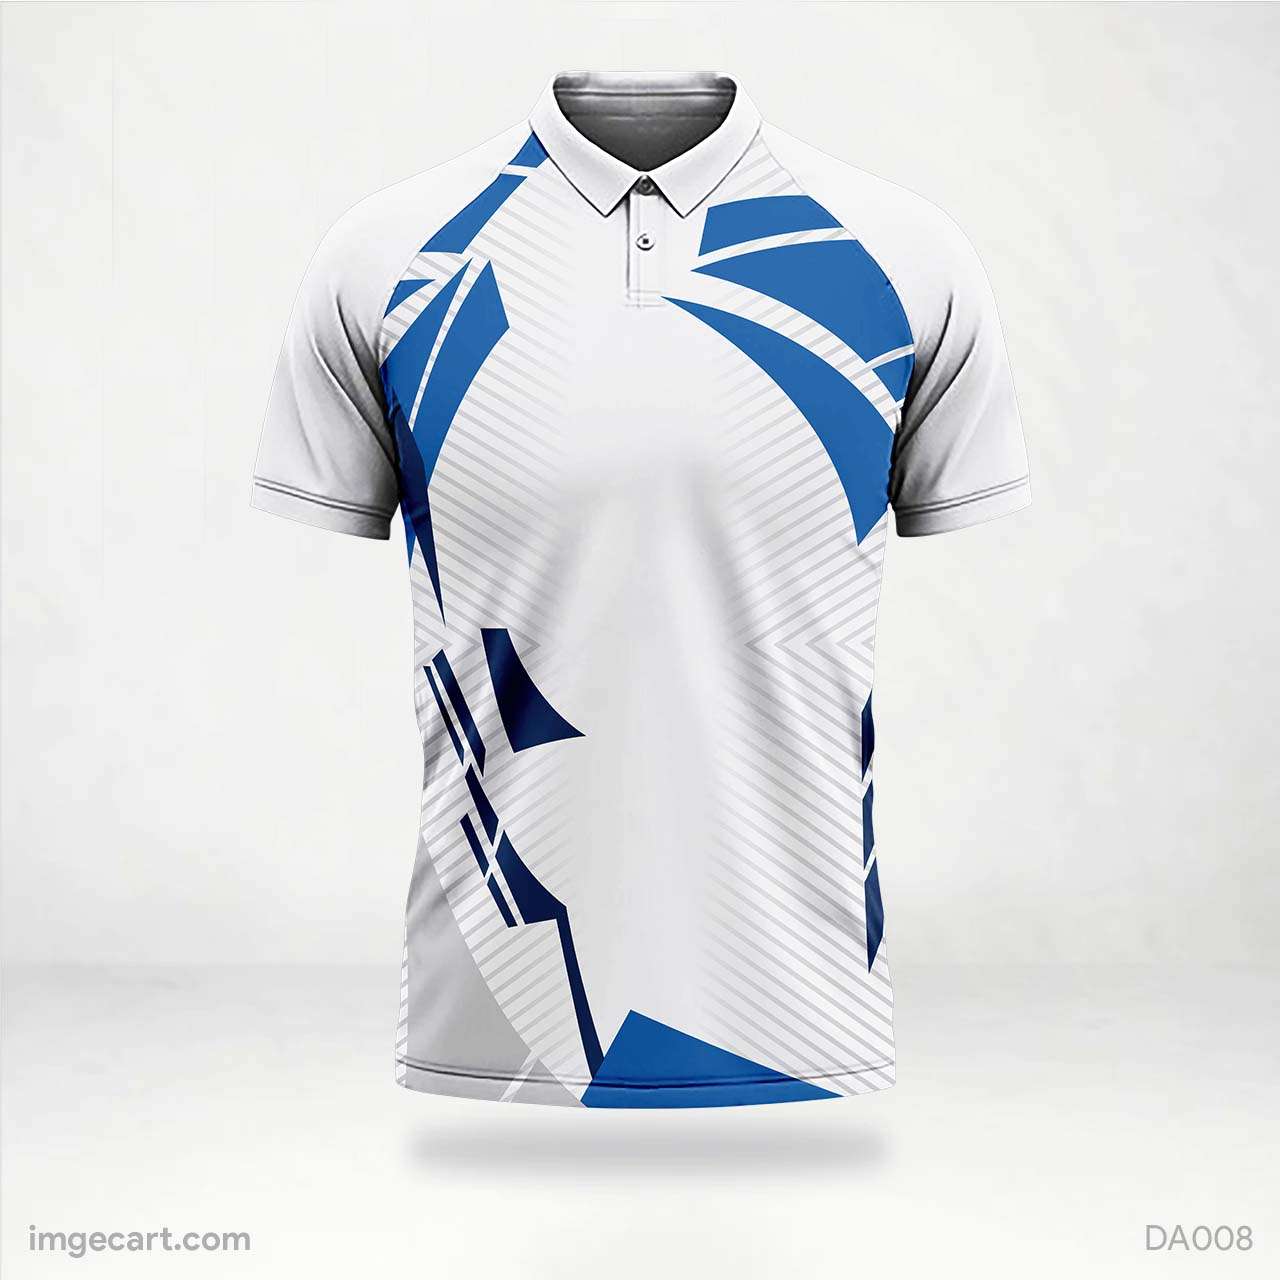 blue and white jersey design